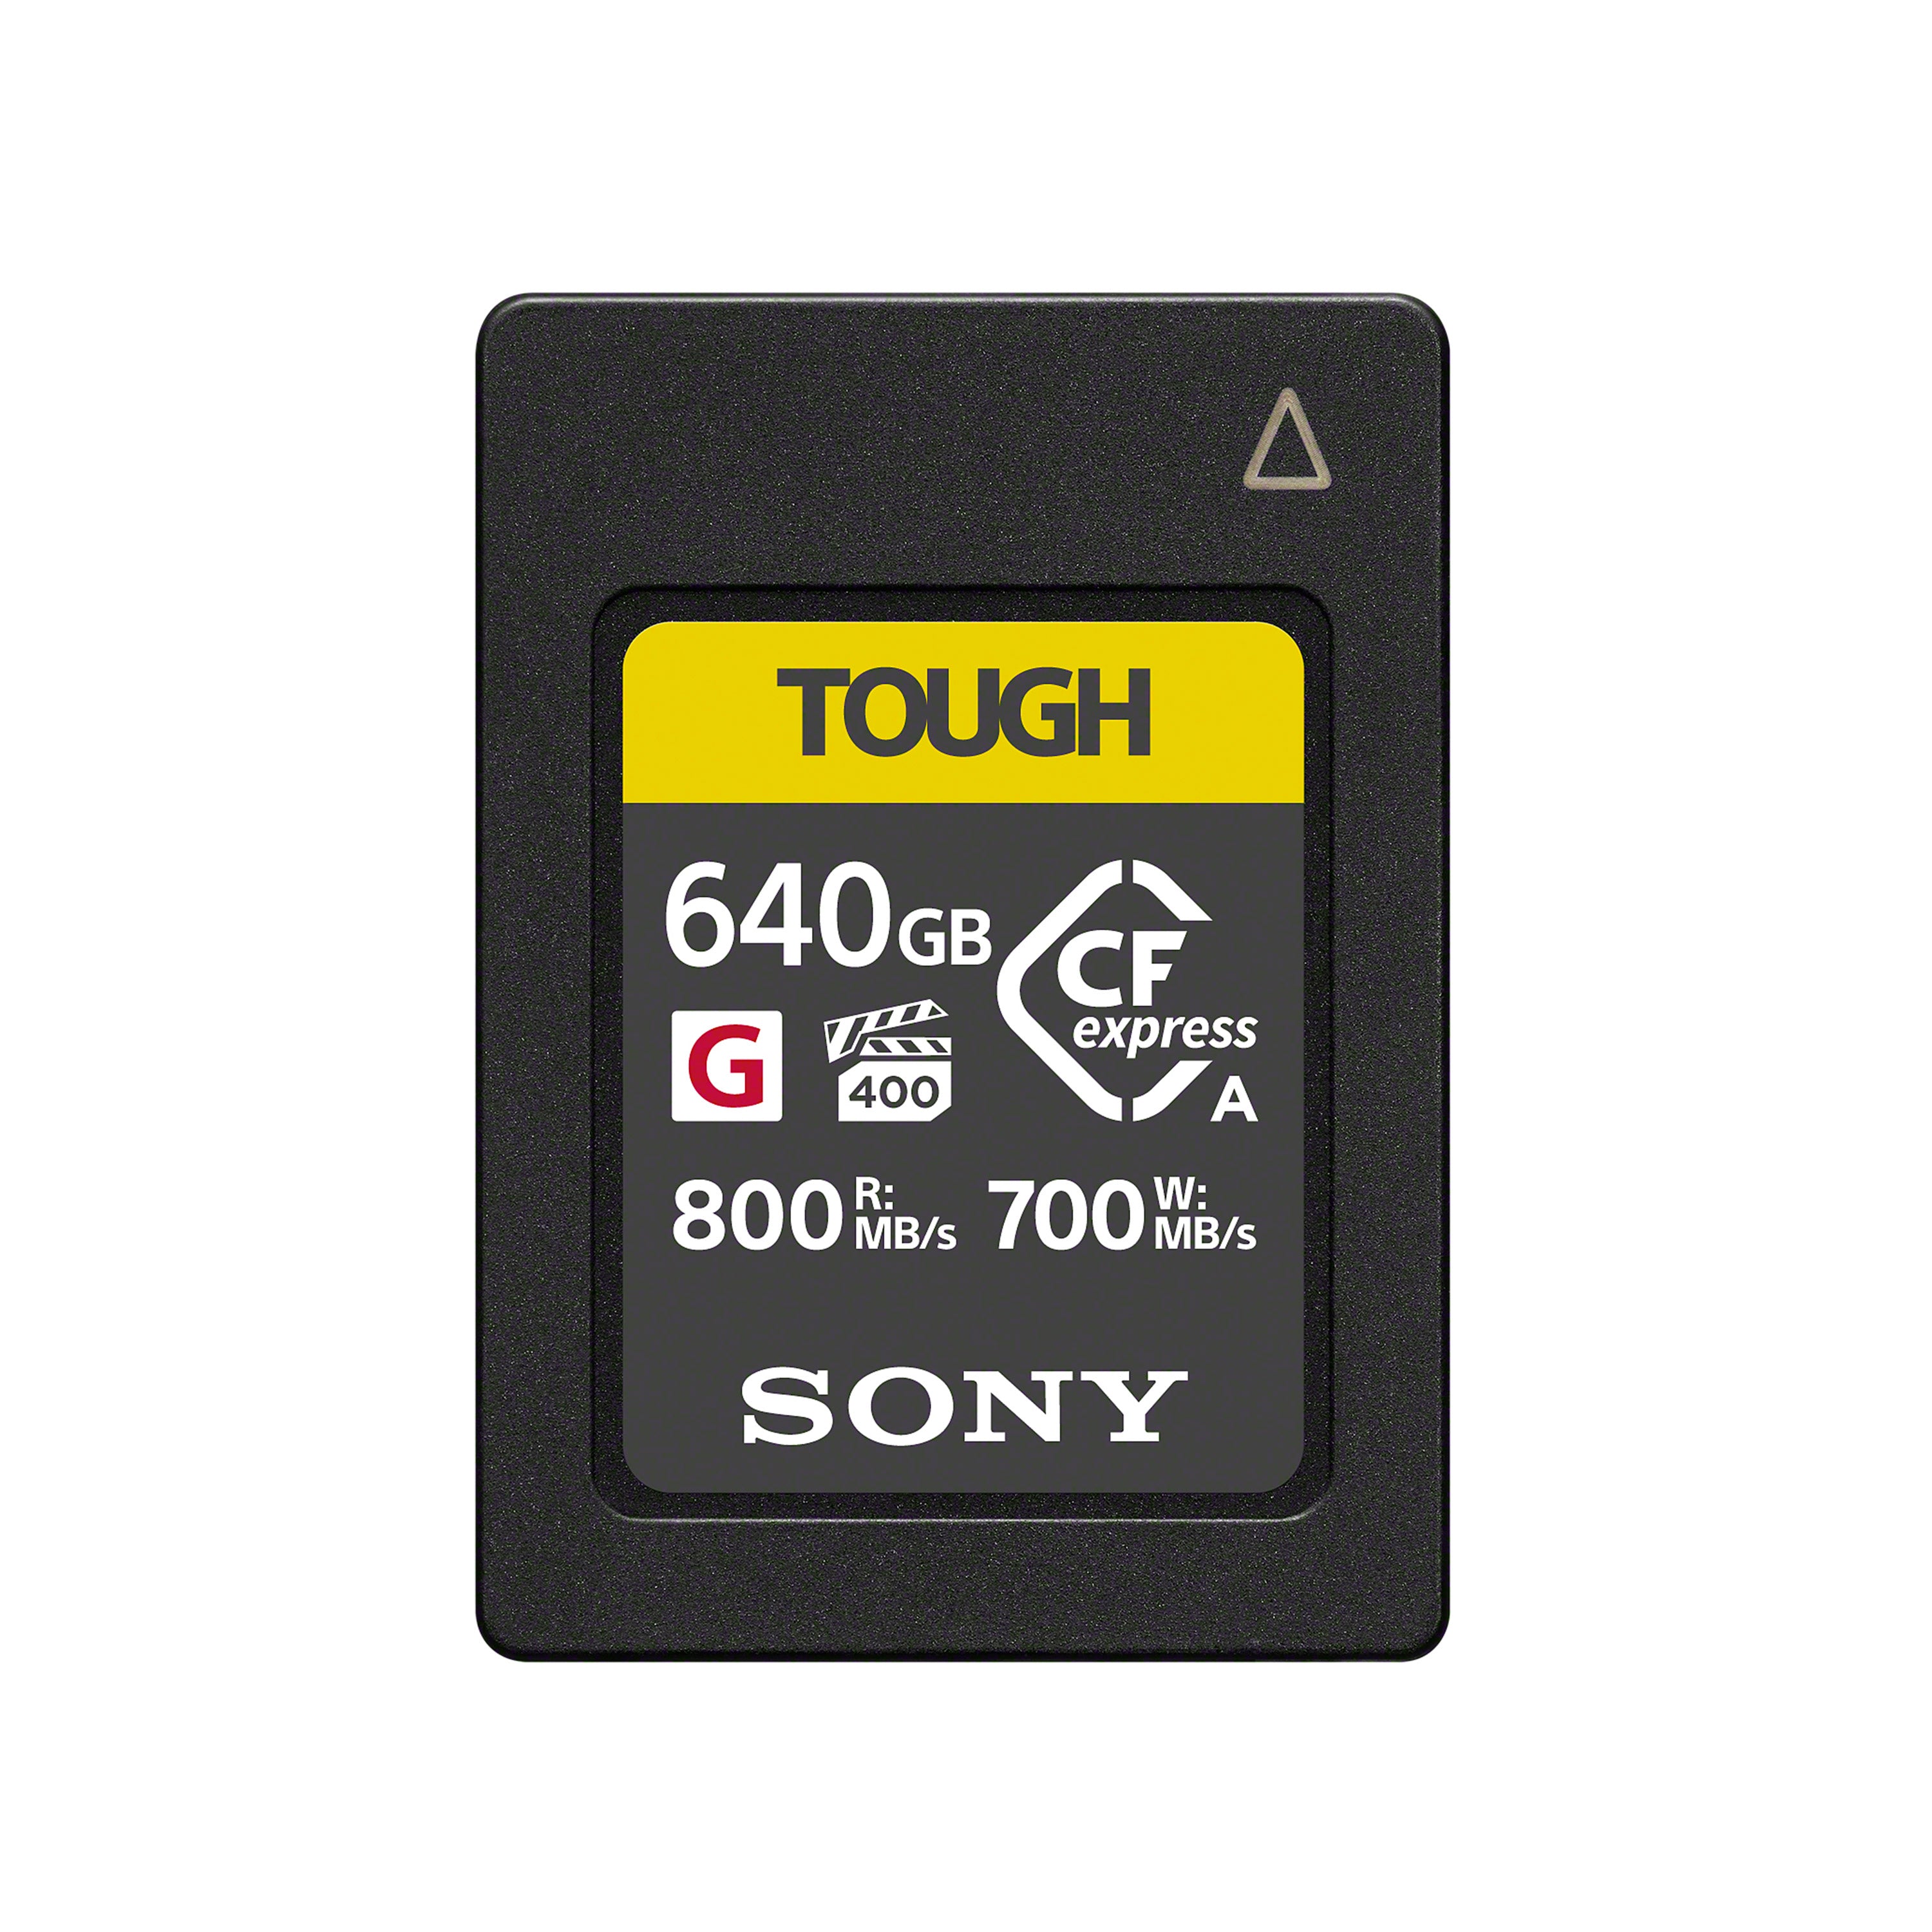 Sony CFexpress Type A G-Series Memory Card